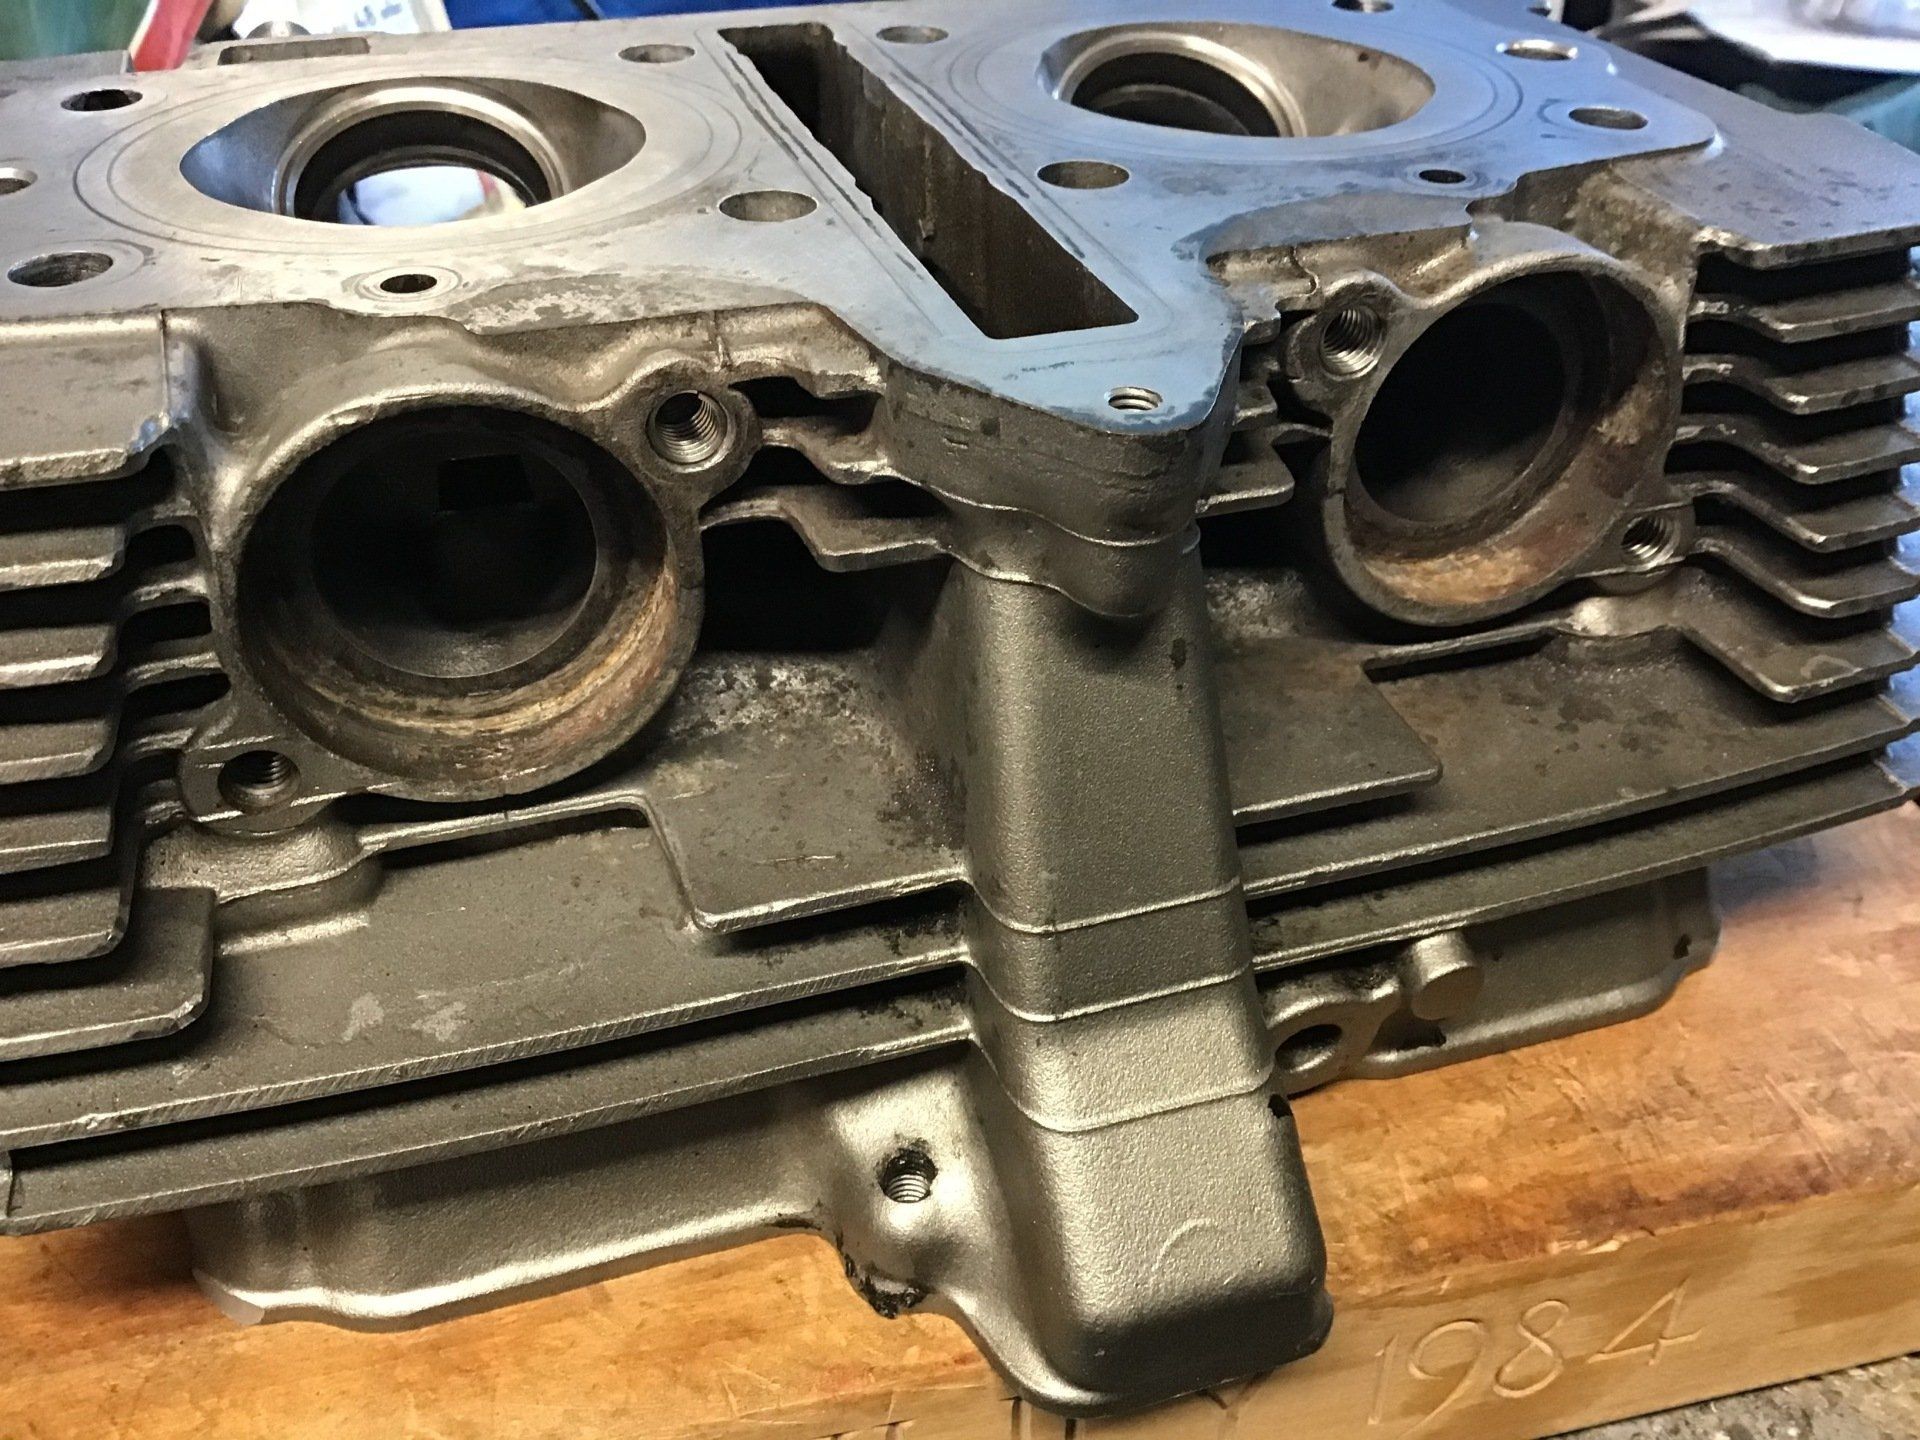 GS500 cylinder head fitted with thread inserts